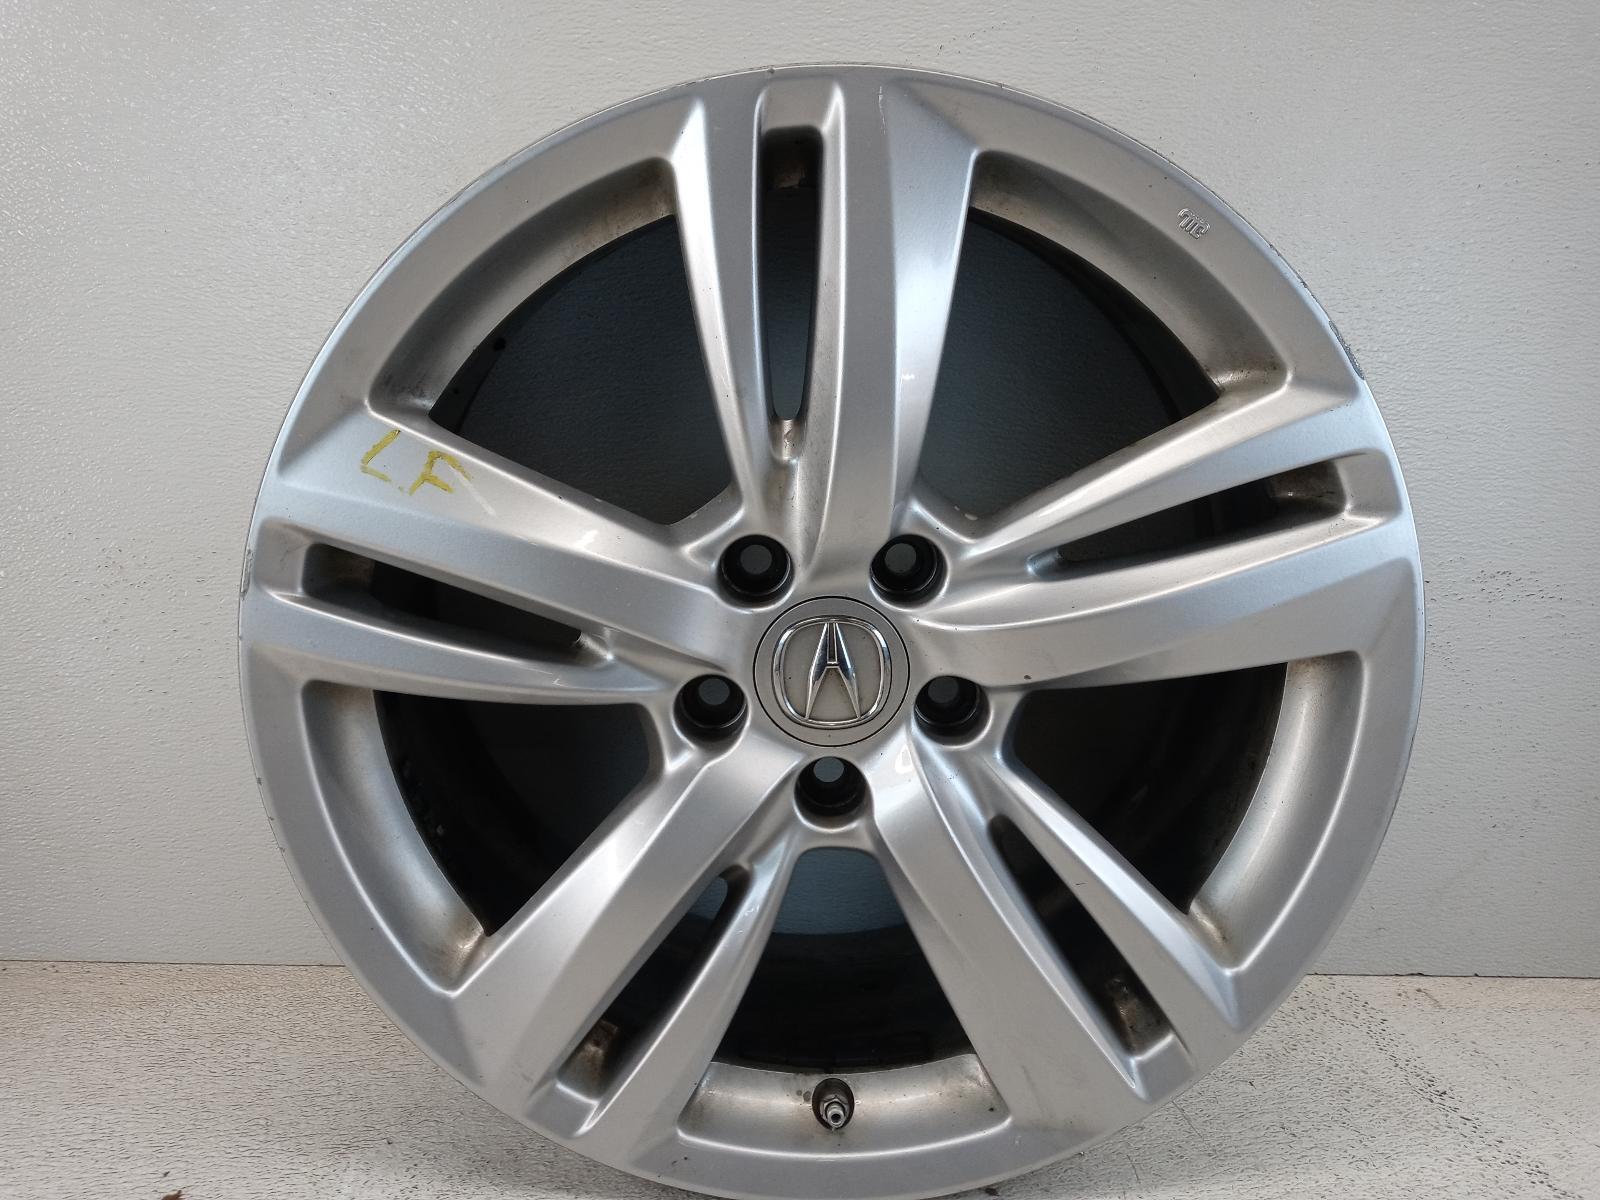 Used Wheel fits: 2015 Acura Rdx 18x7-1/2 10 spoke alloy TPMS thin and thick 5 do